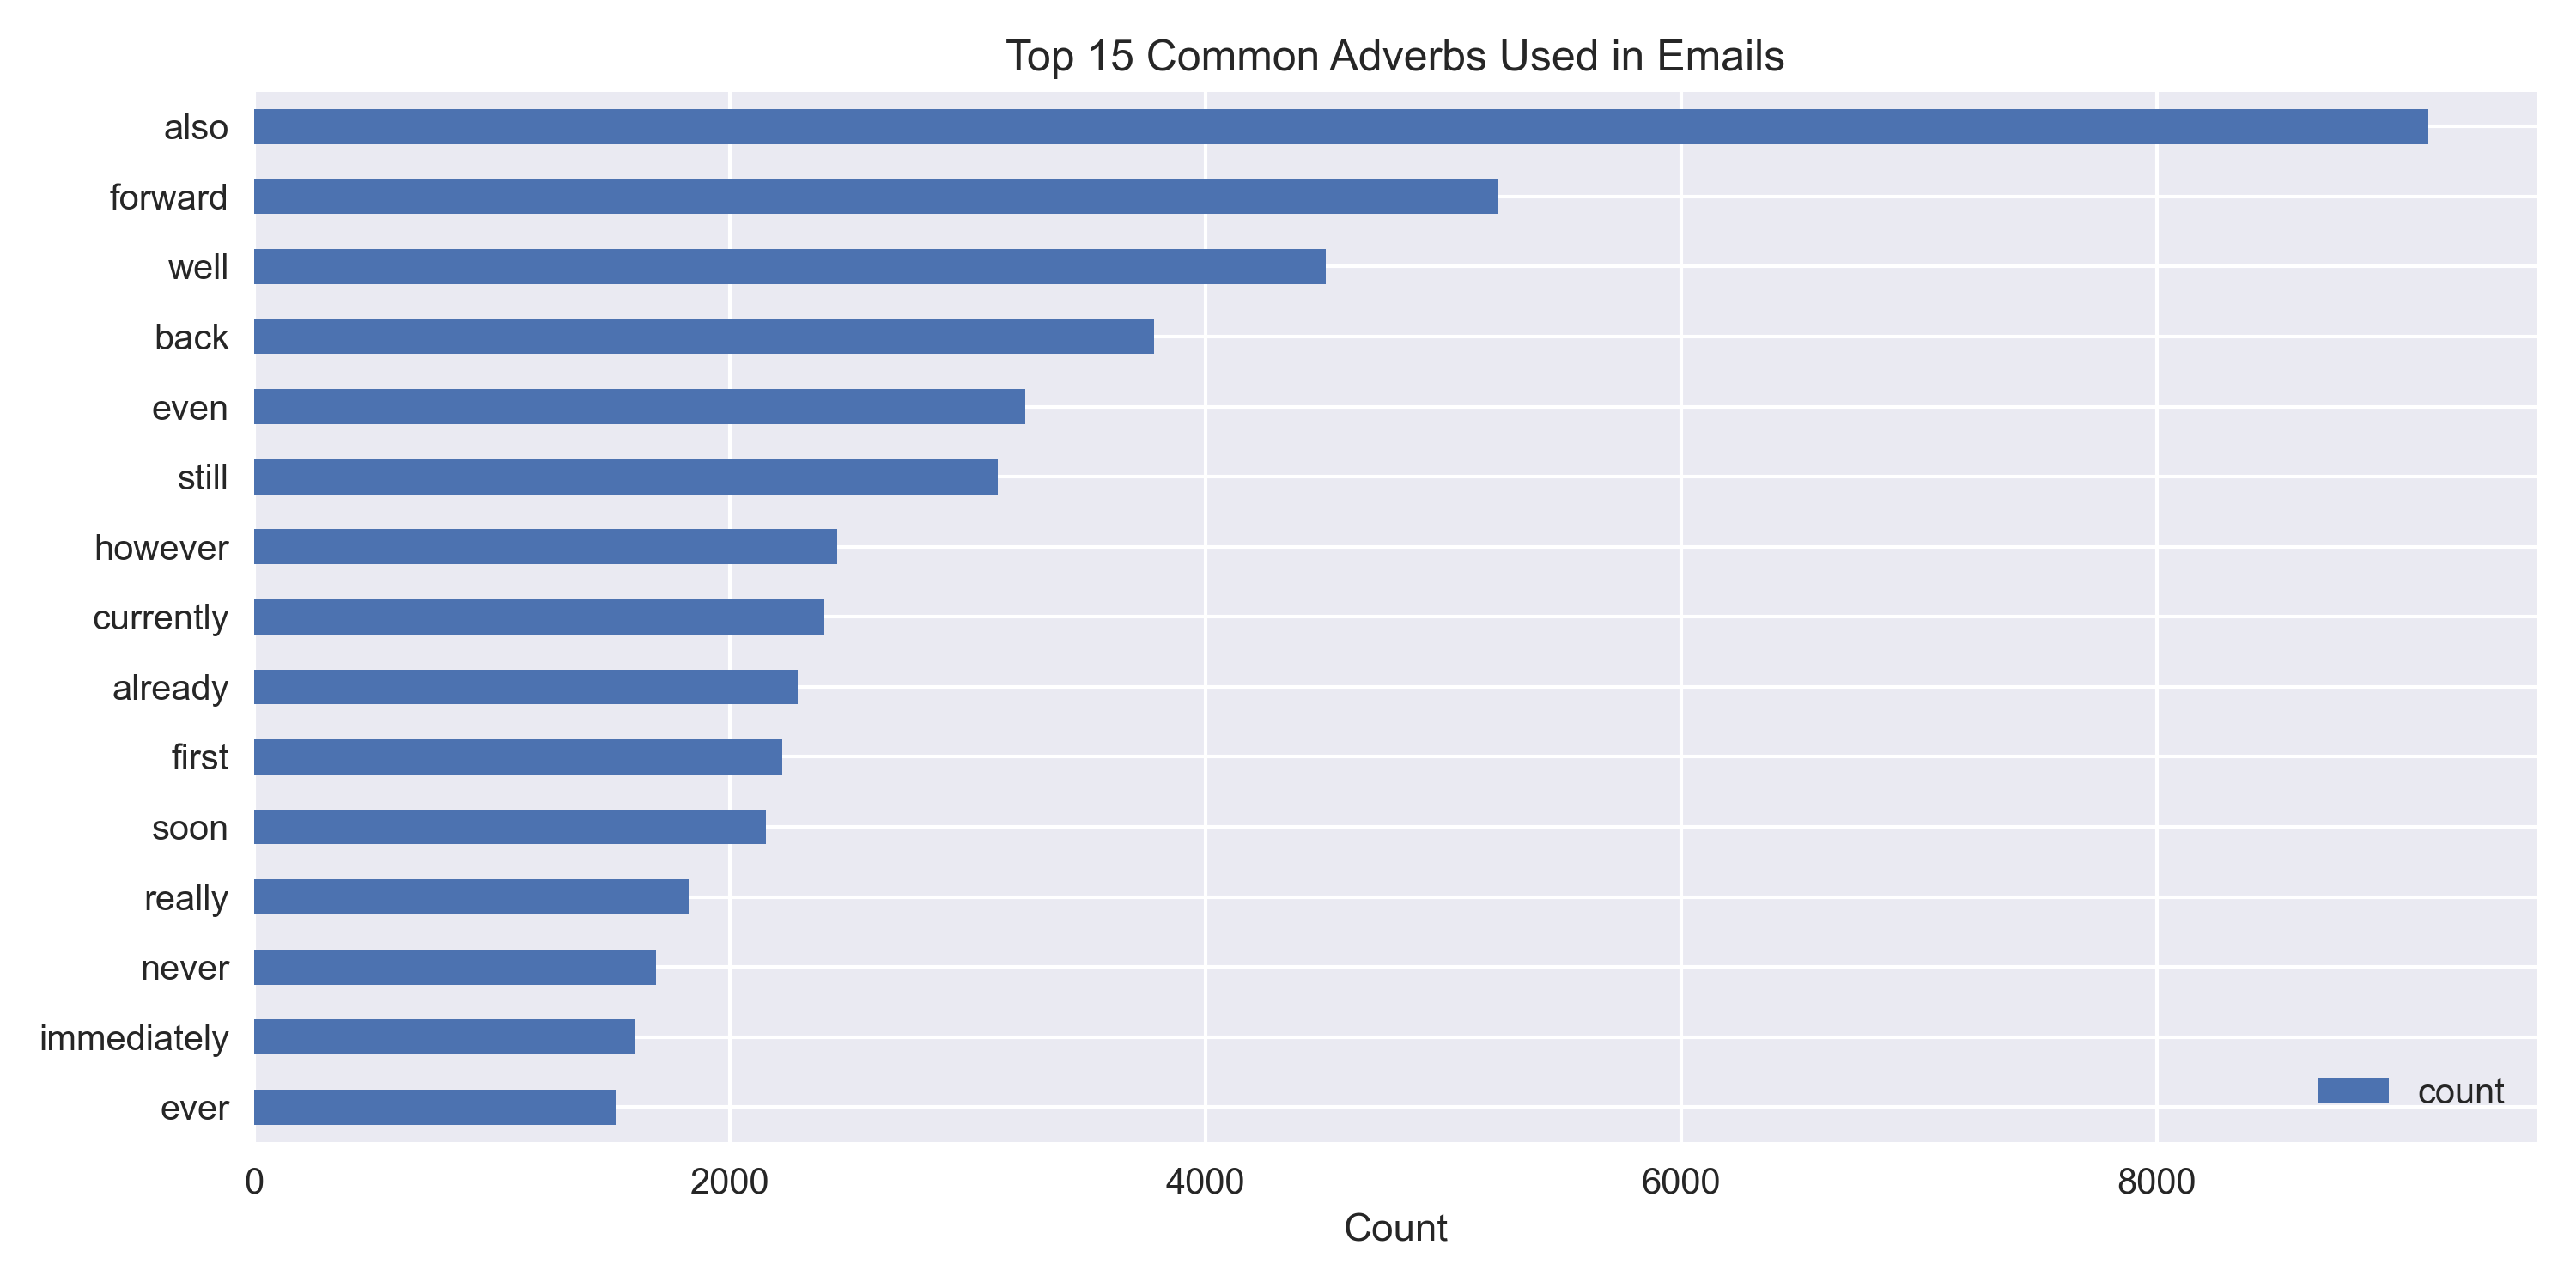 Top 15 Common Adverbs Used in Emails